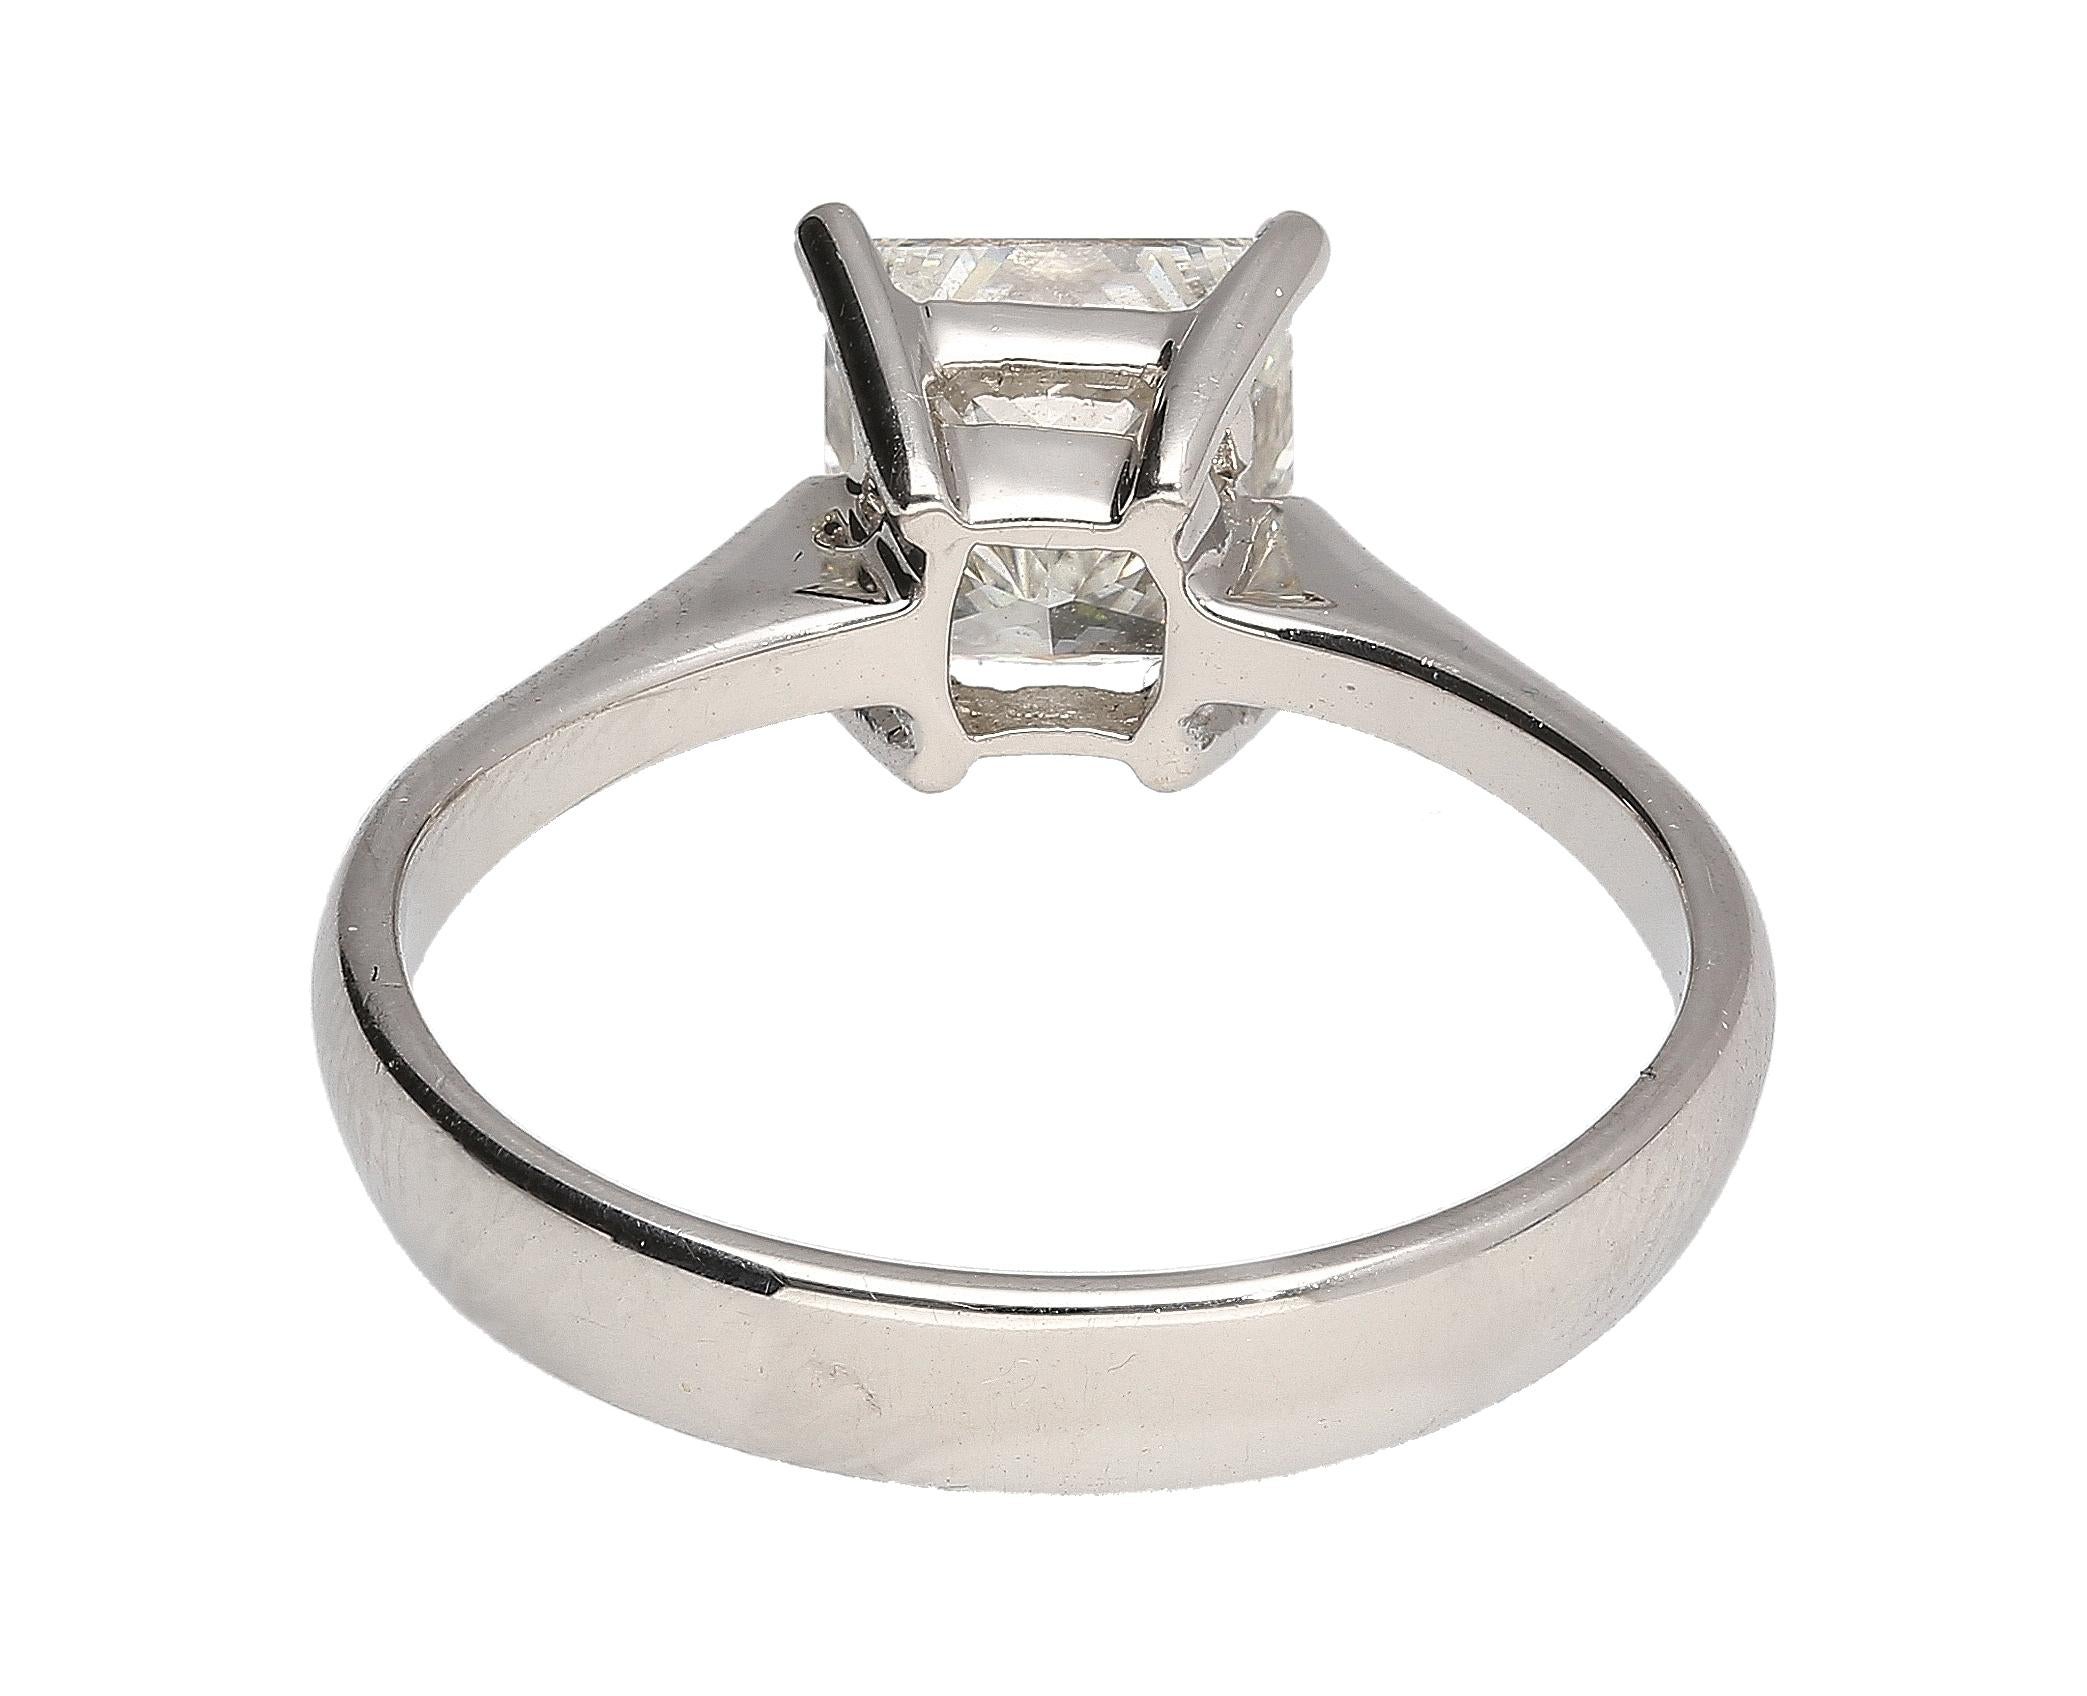 GIA certified princess cut 1.64 carat diamond ring, set in a stunning tiffany-style 18K white gold setting. This is a classic, stunning natural diamond solitaire ring that lets the center stone do all the talking. The diamond is eye clean,